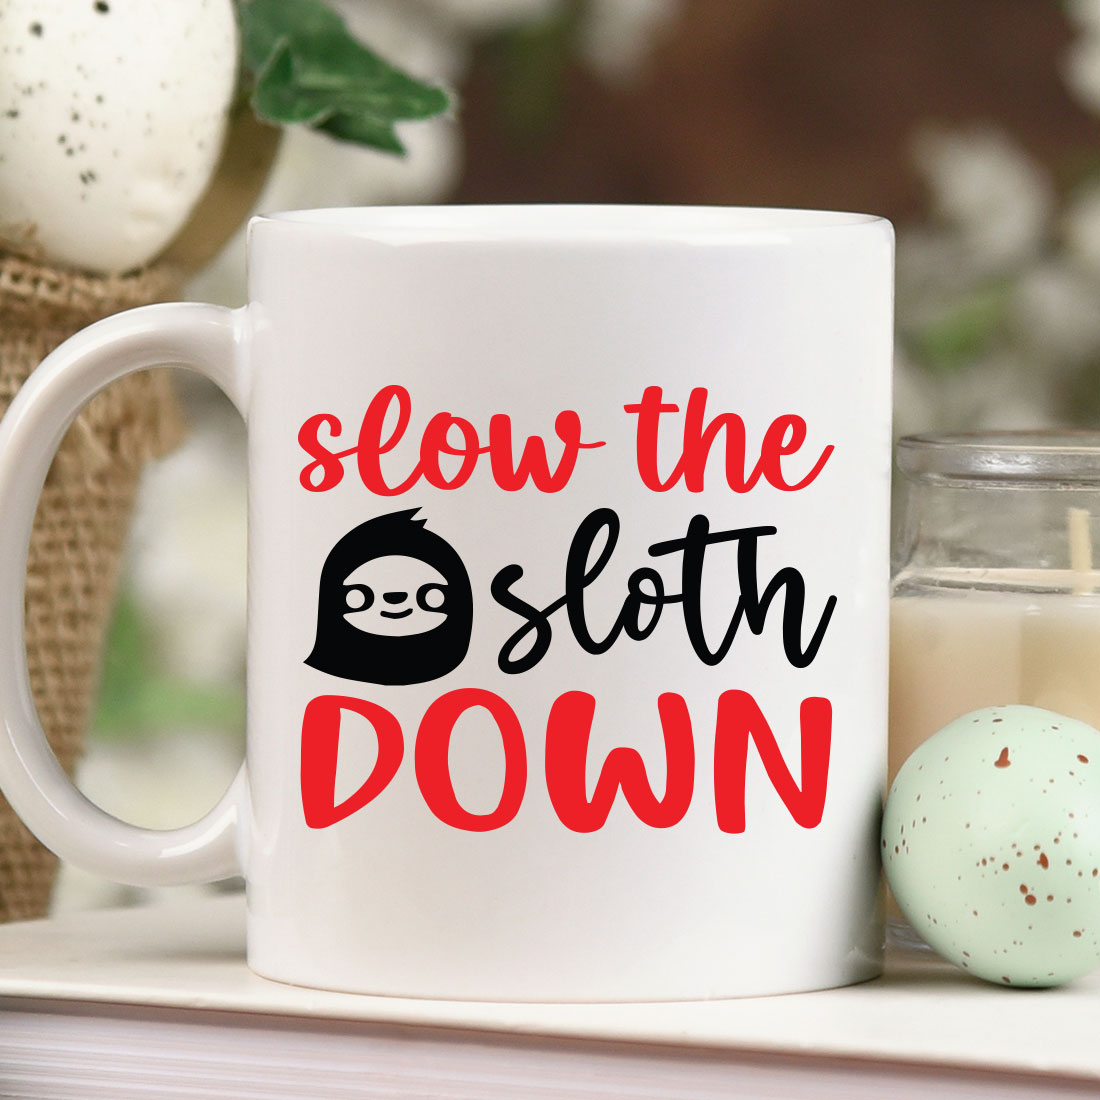 Coffee mug that says slow the sloth down next to a candle.